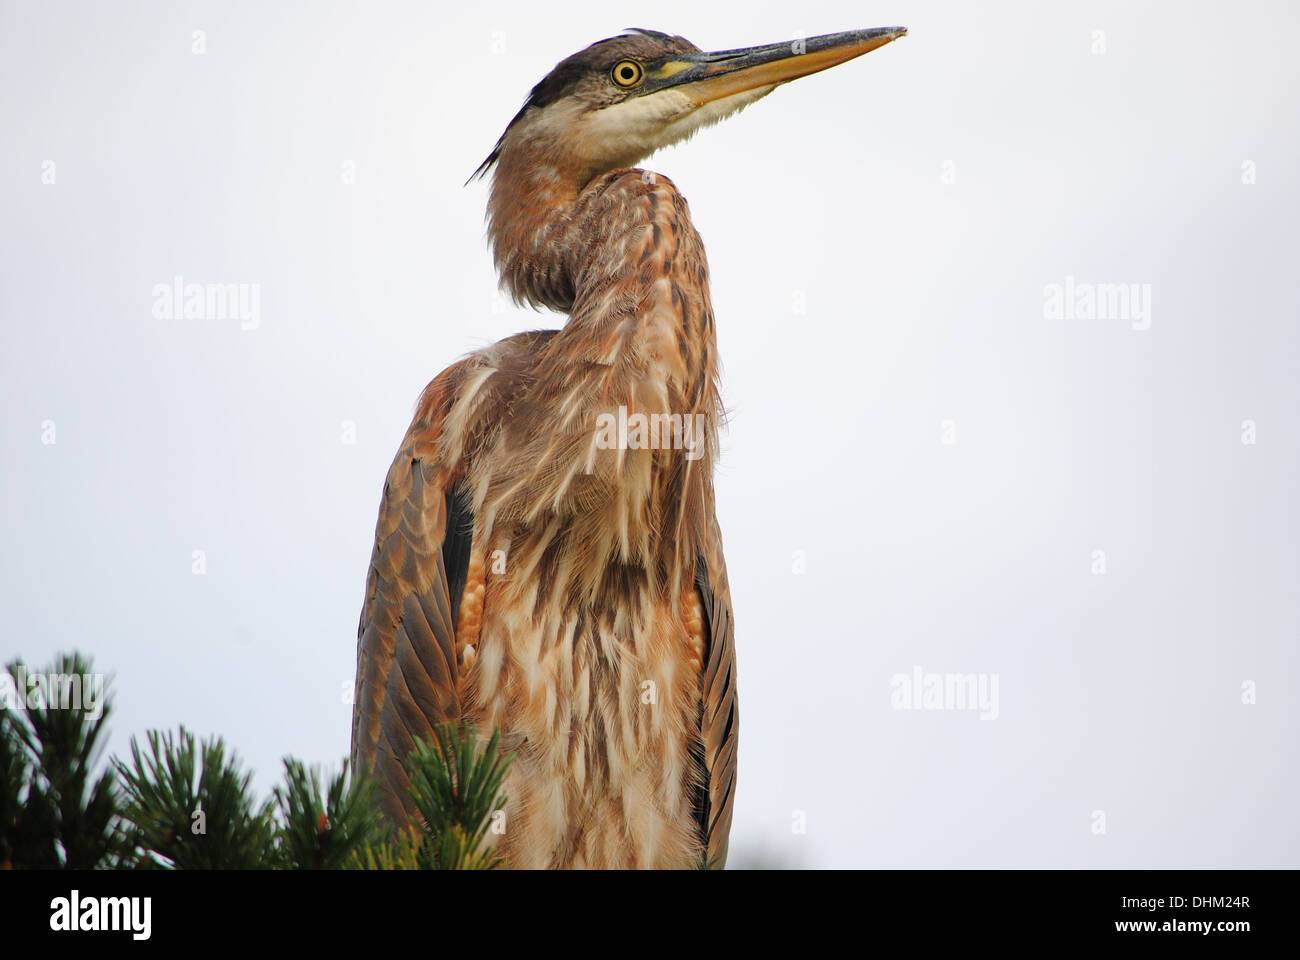 The Blue Heron,profiles at the top of a pine tree,expressing greatness. Stock Photo